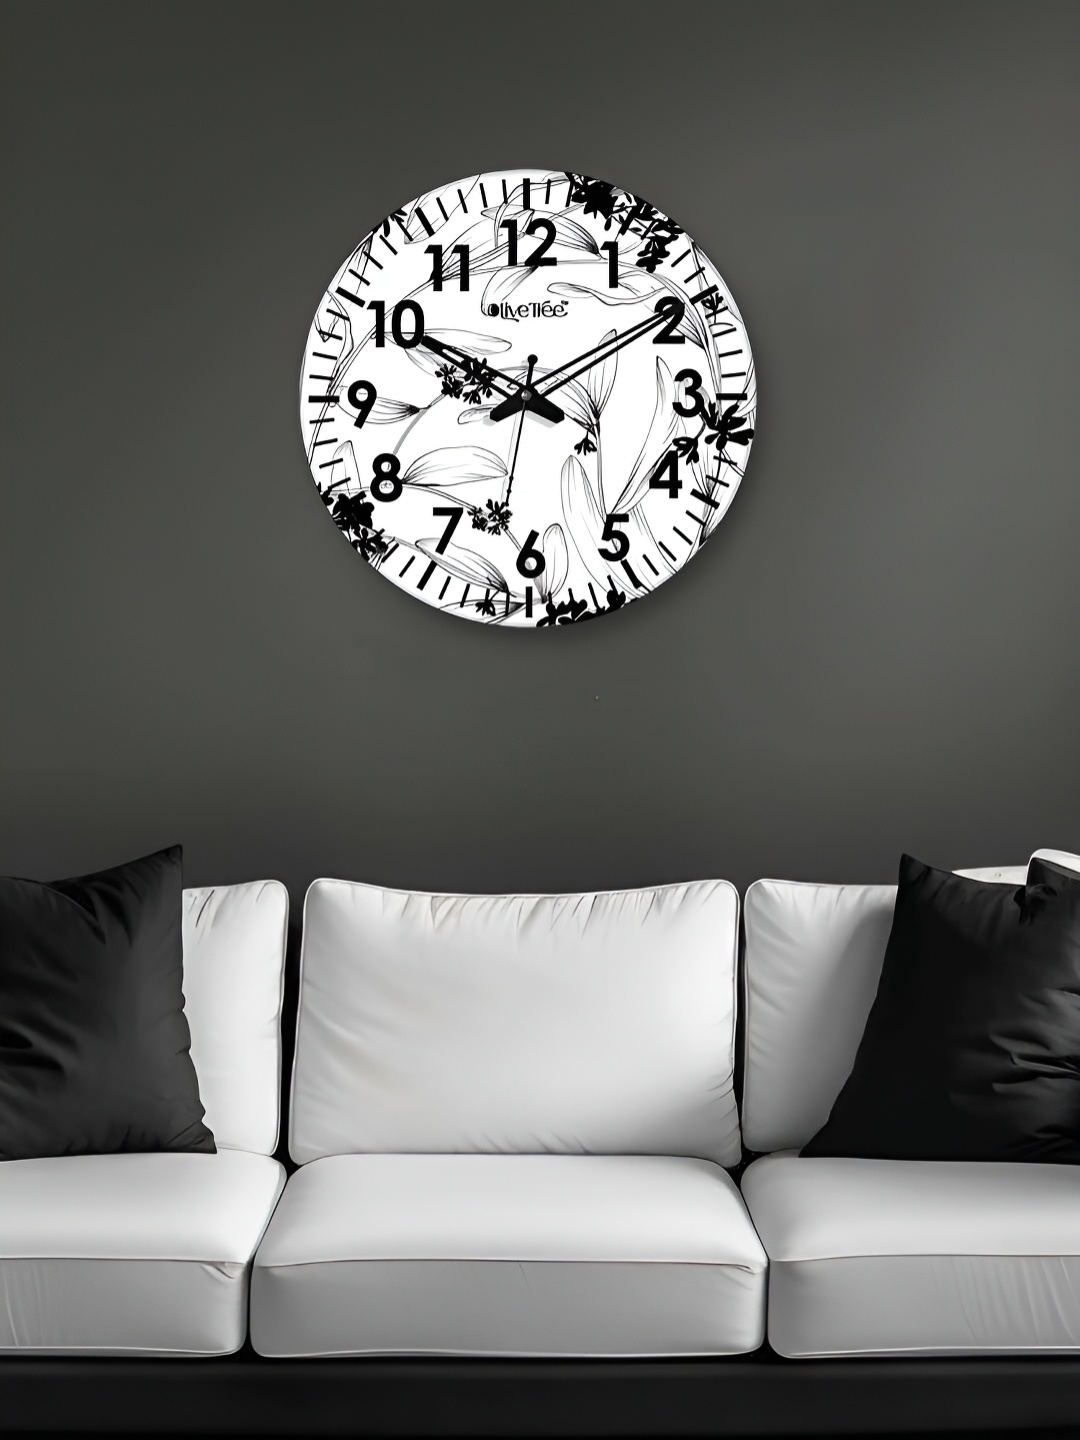 

OLIVE TREE White & Black Printed Analogue Contemporary Wall Clock